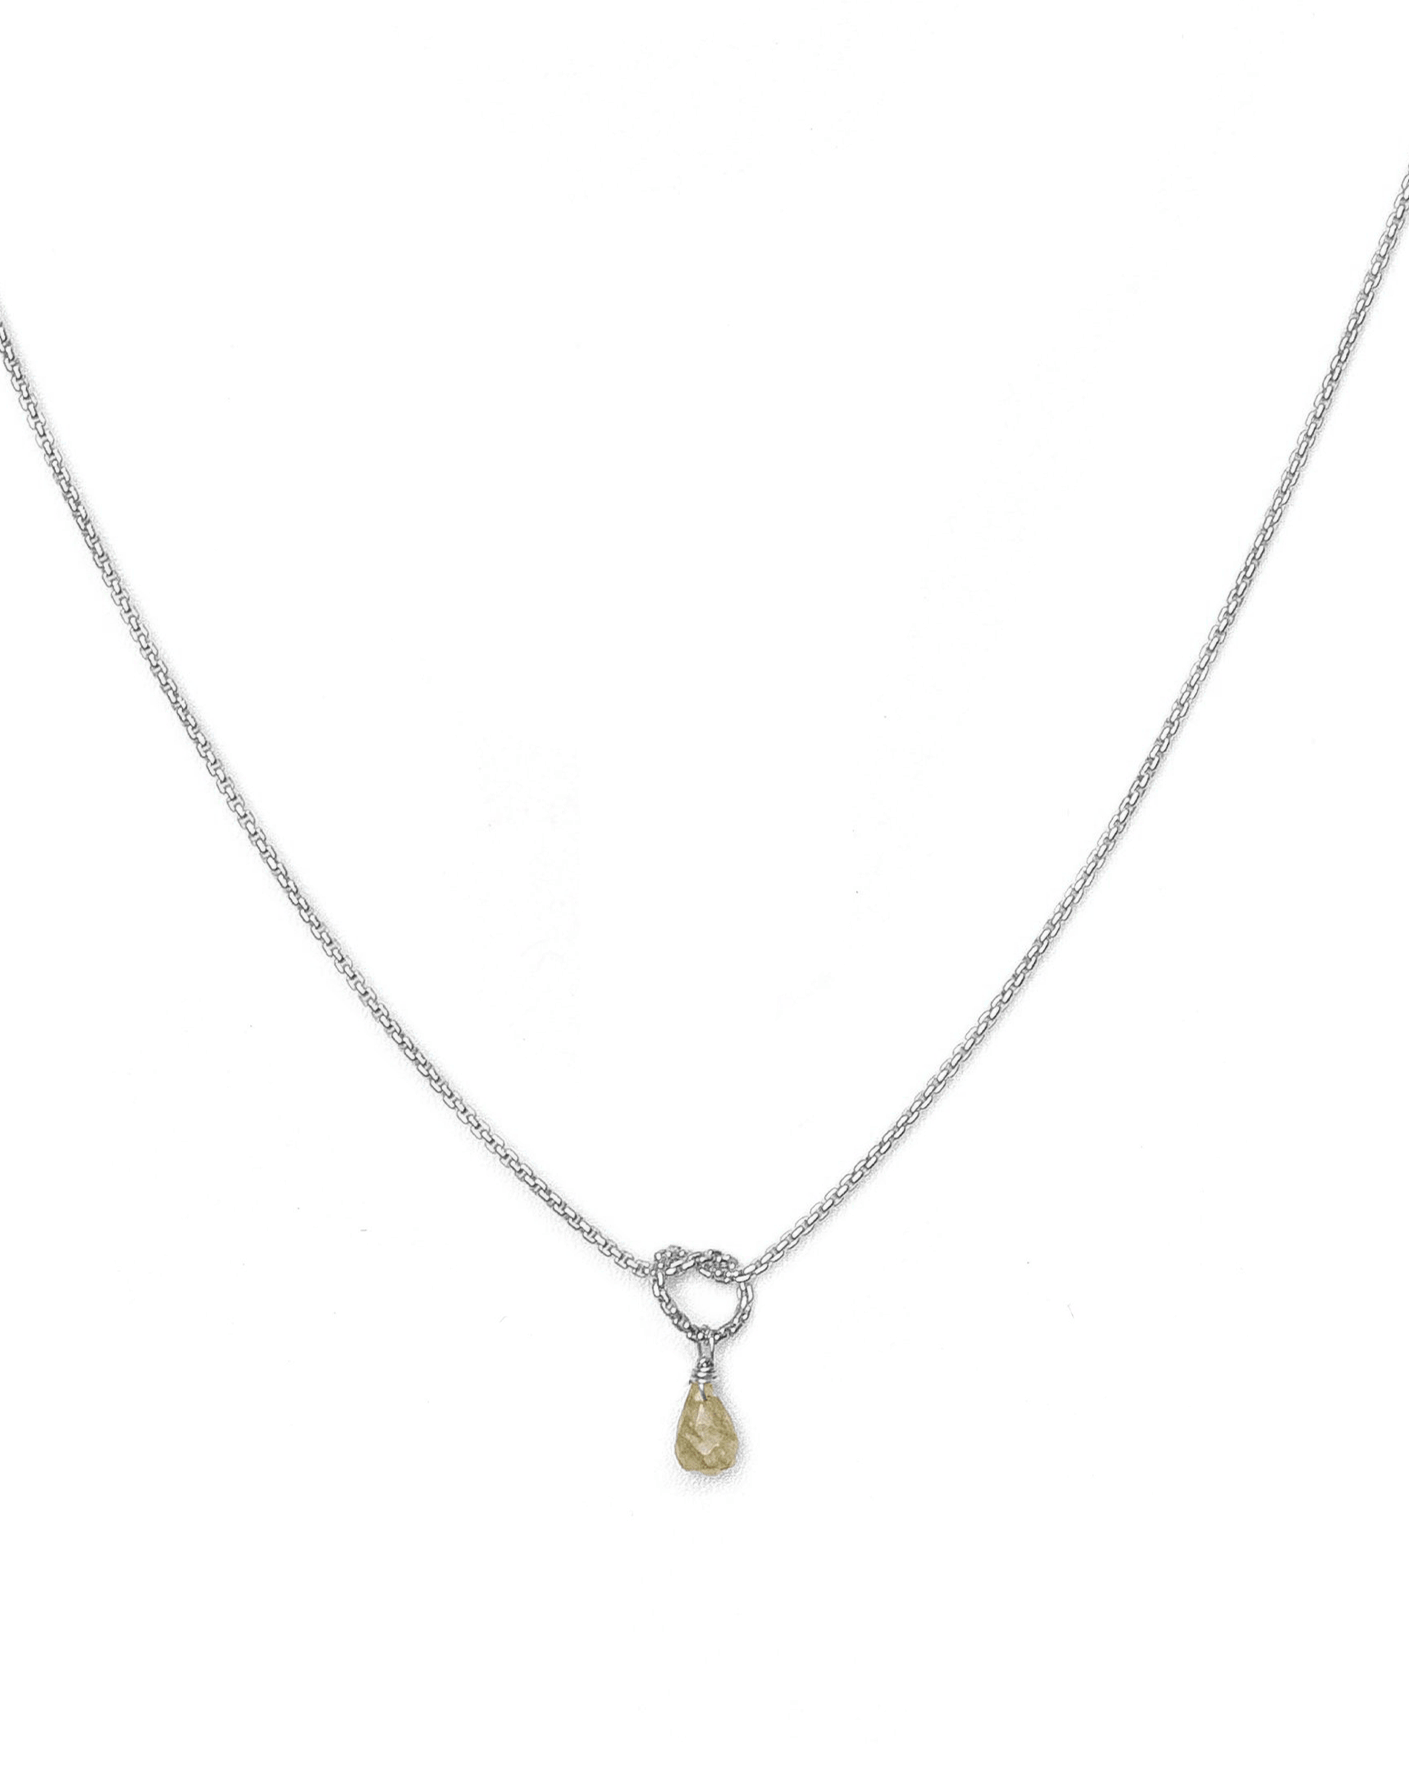 Love Knot Necklace by KOZAKH. A 16 to 18 inch adjustable length necklace, crafted in Sterling Silver, featuring a knot and a faceted Champagne Sapphire droplet.